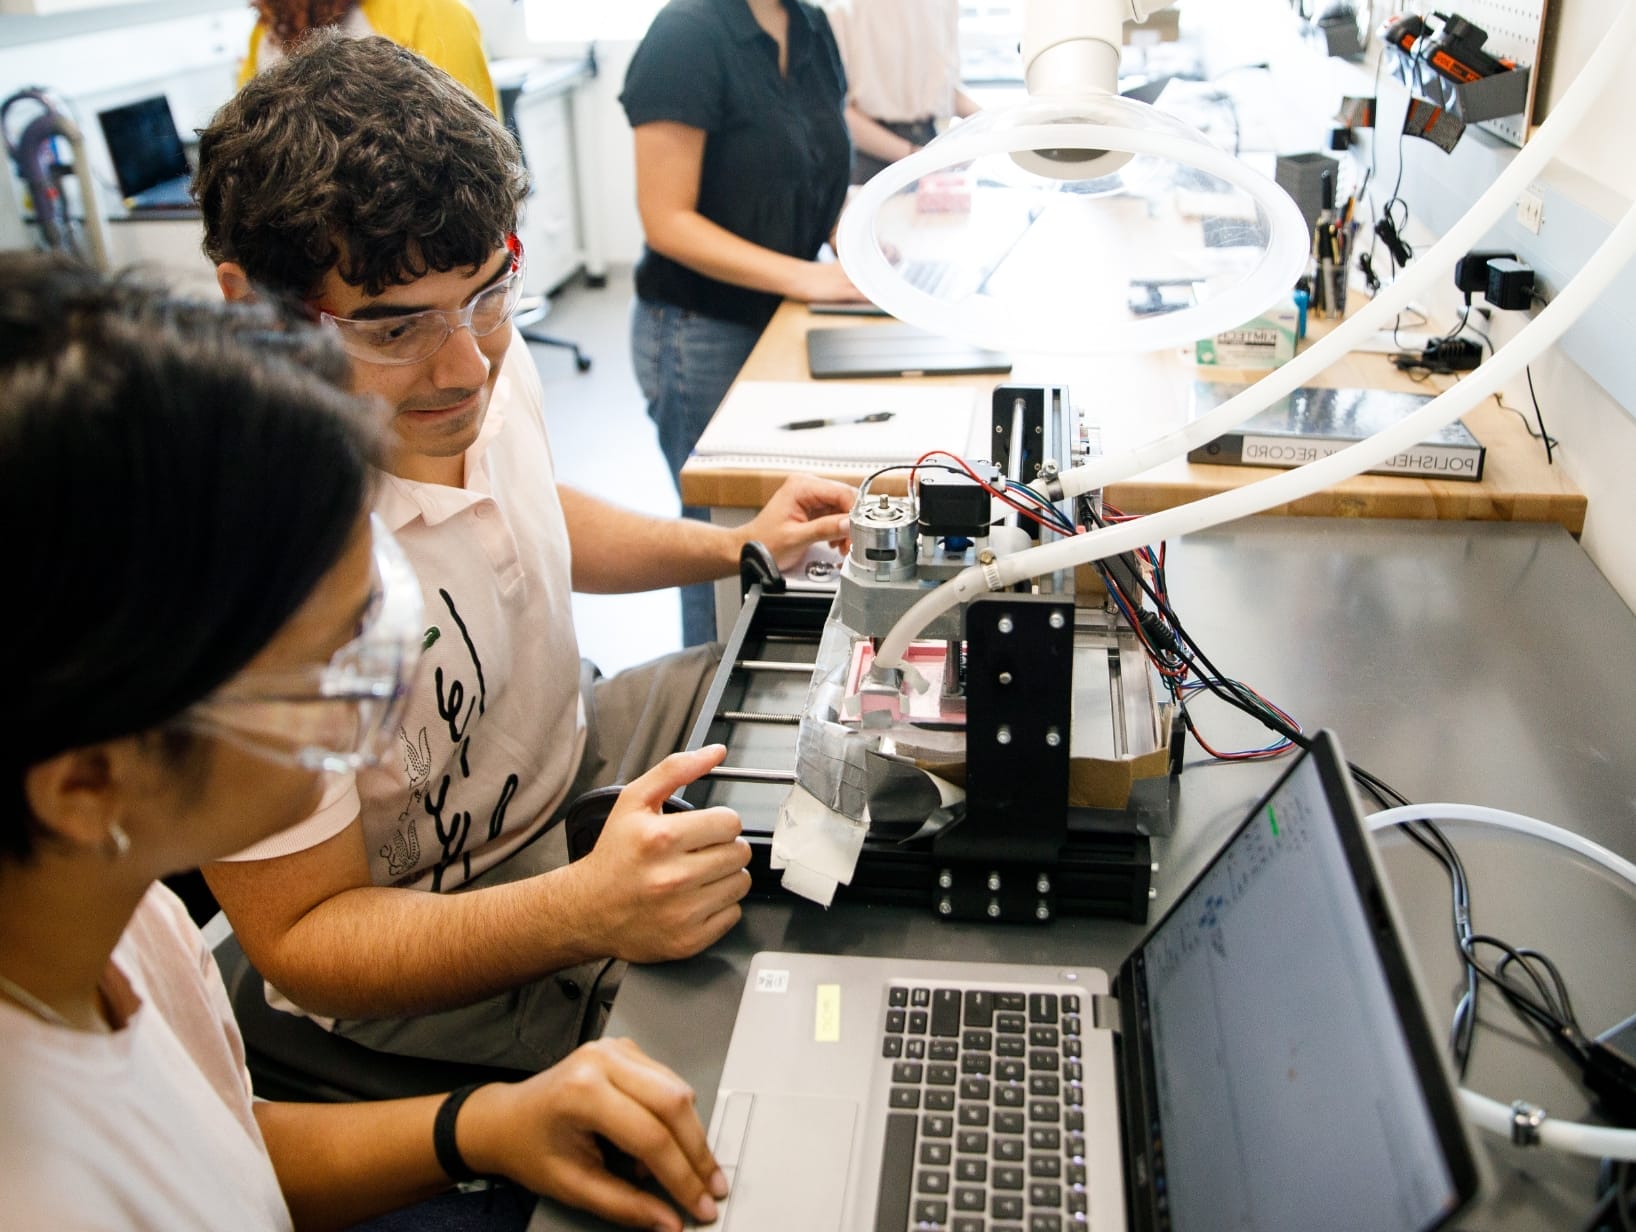 ASU students working in a lab as part of the School of Sustainability undergraduate research program